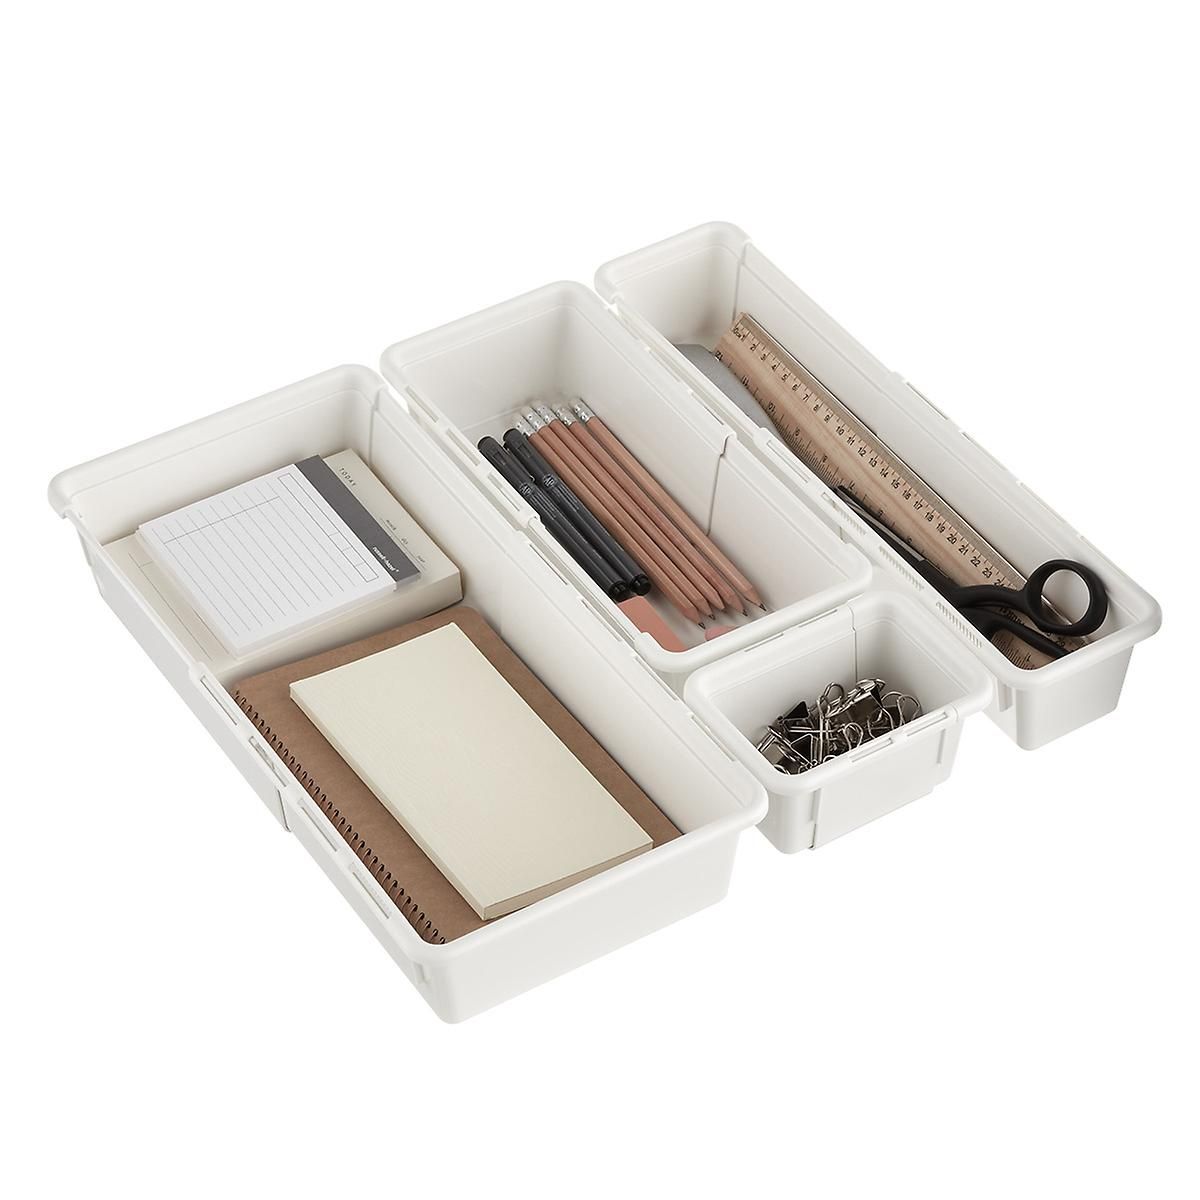 Expandable Drawer Organizer | The Container Store